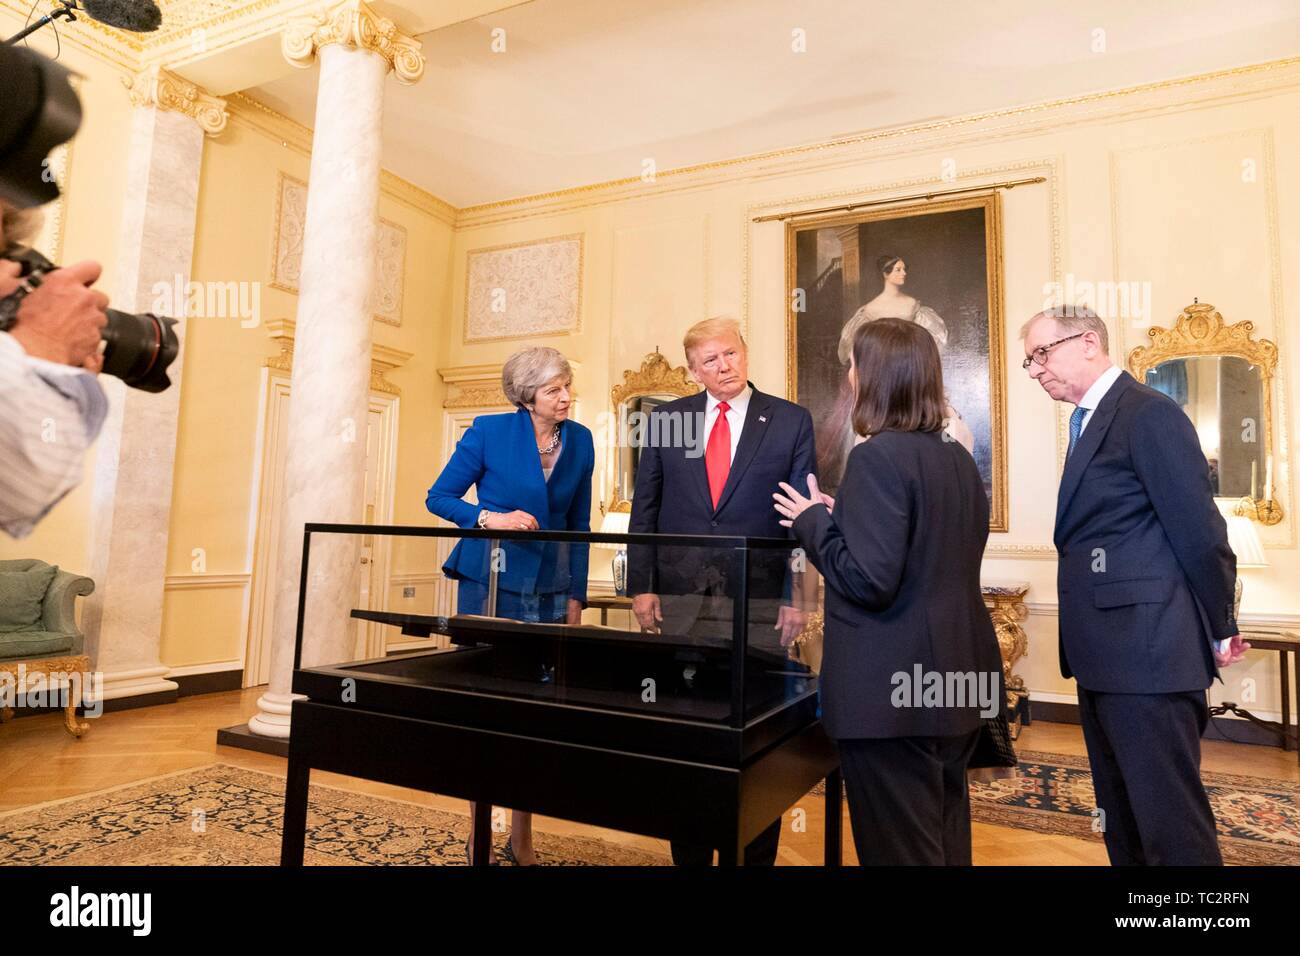 London, UK. 04th June, 2019. U.S President Donald Trump outgoing British Prime Minister Theresa May and her husband Philip May, right, view an original copy of the U.S. Declaration of Independence during a tour of historic documents at #10 Downing Street June 4, 2019 in London, England. The handwritten parchment copy of the U.S. Declaration of Independence, known as the Sussex Declaration, is one of only two known to exist. Credit: Planetpix/Alamy Live News Stock Photo